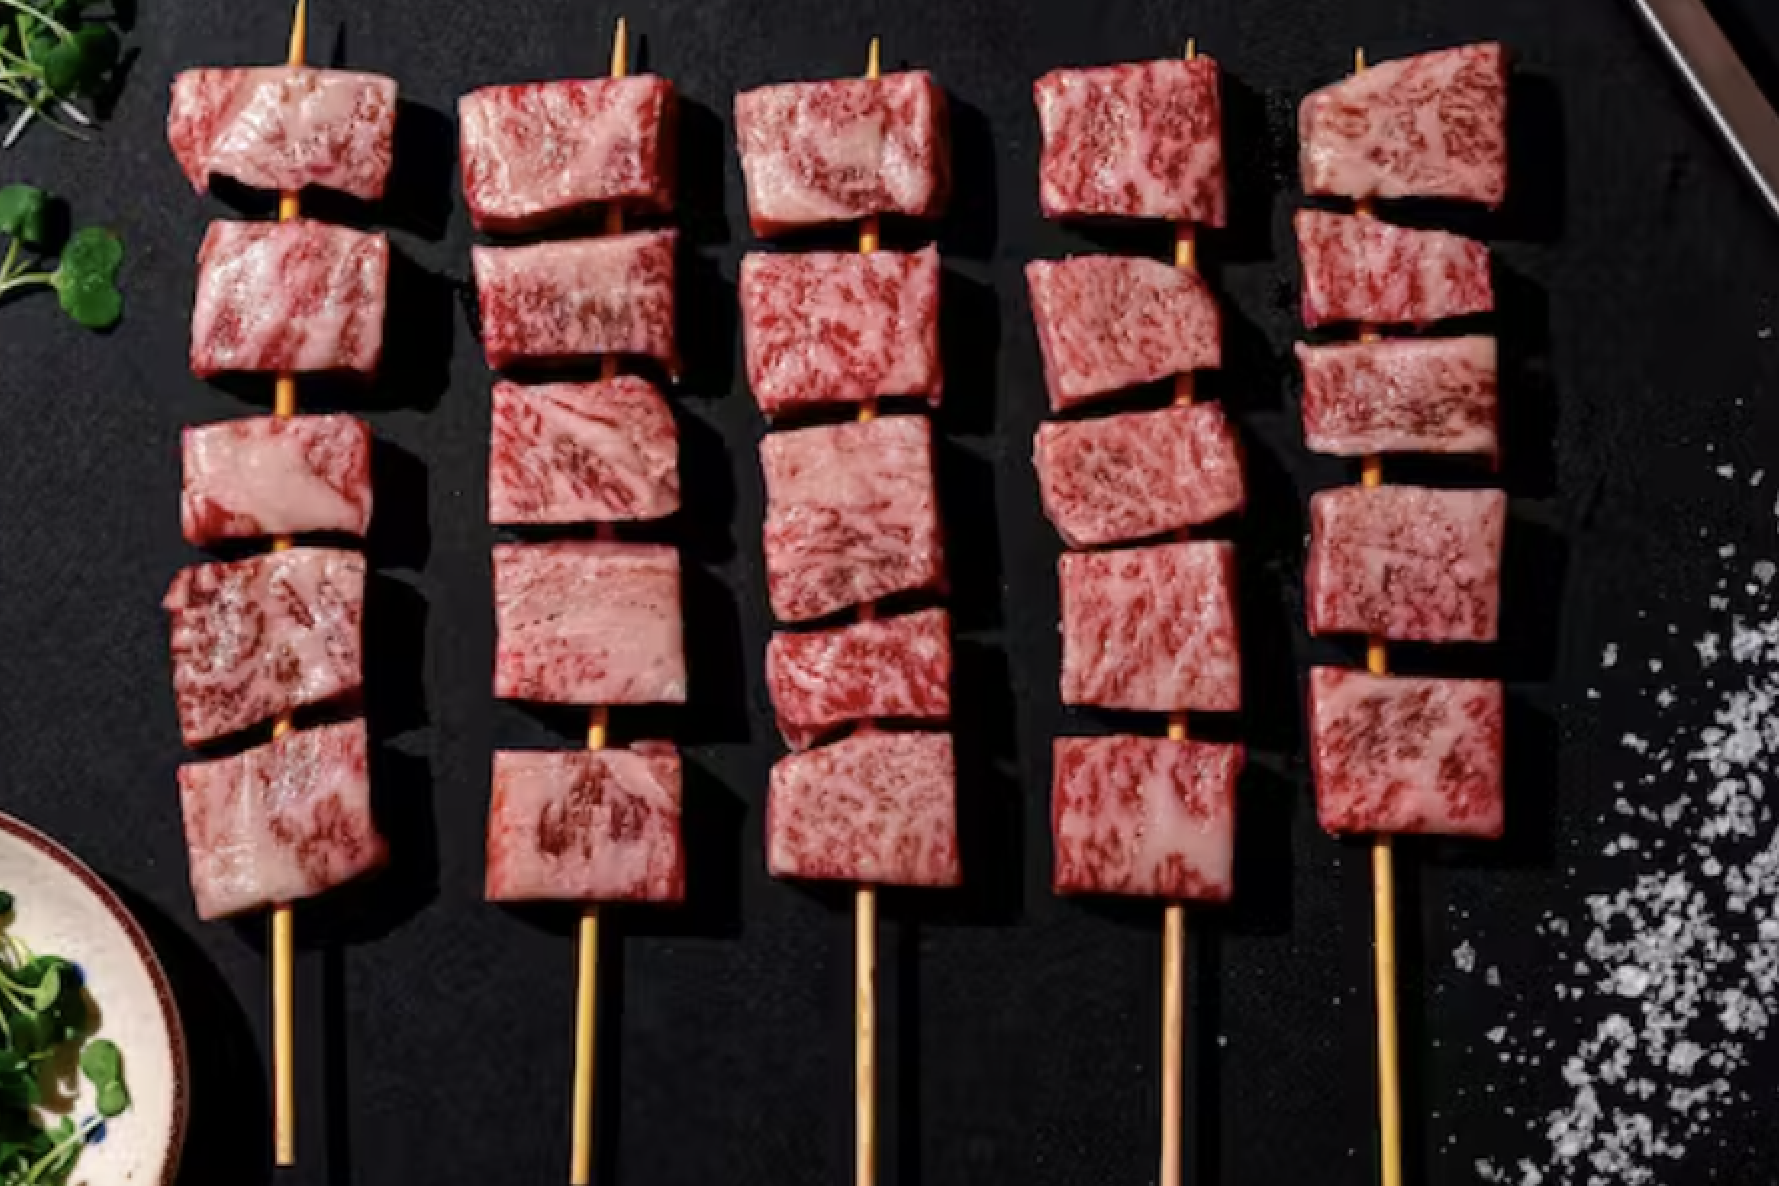 Crowd Cow's A5 Wagyu striploin skewers.